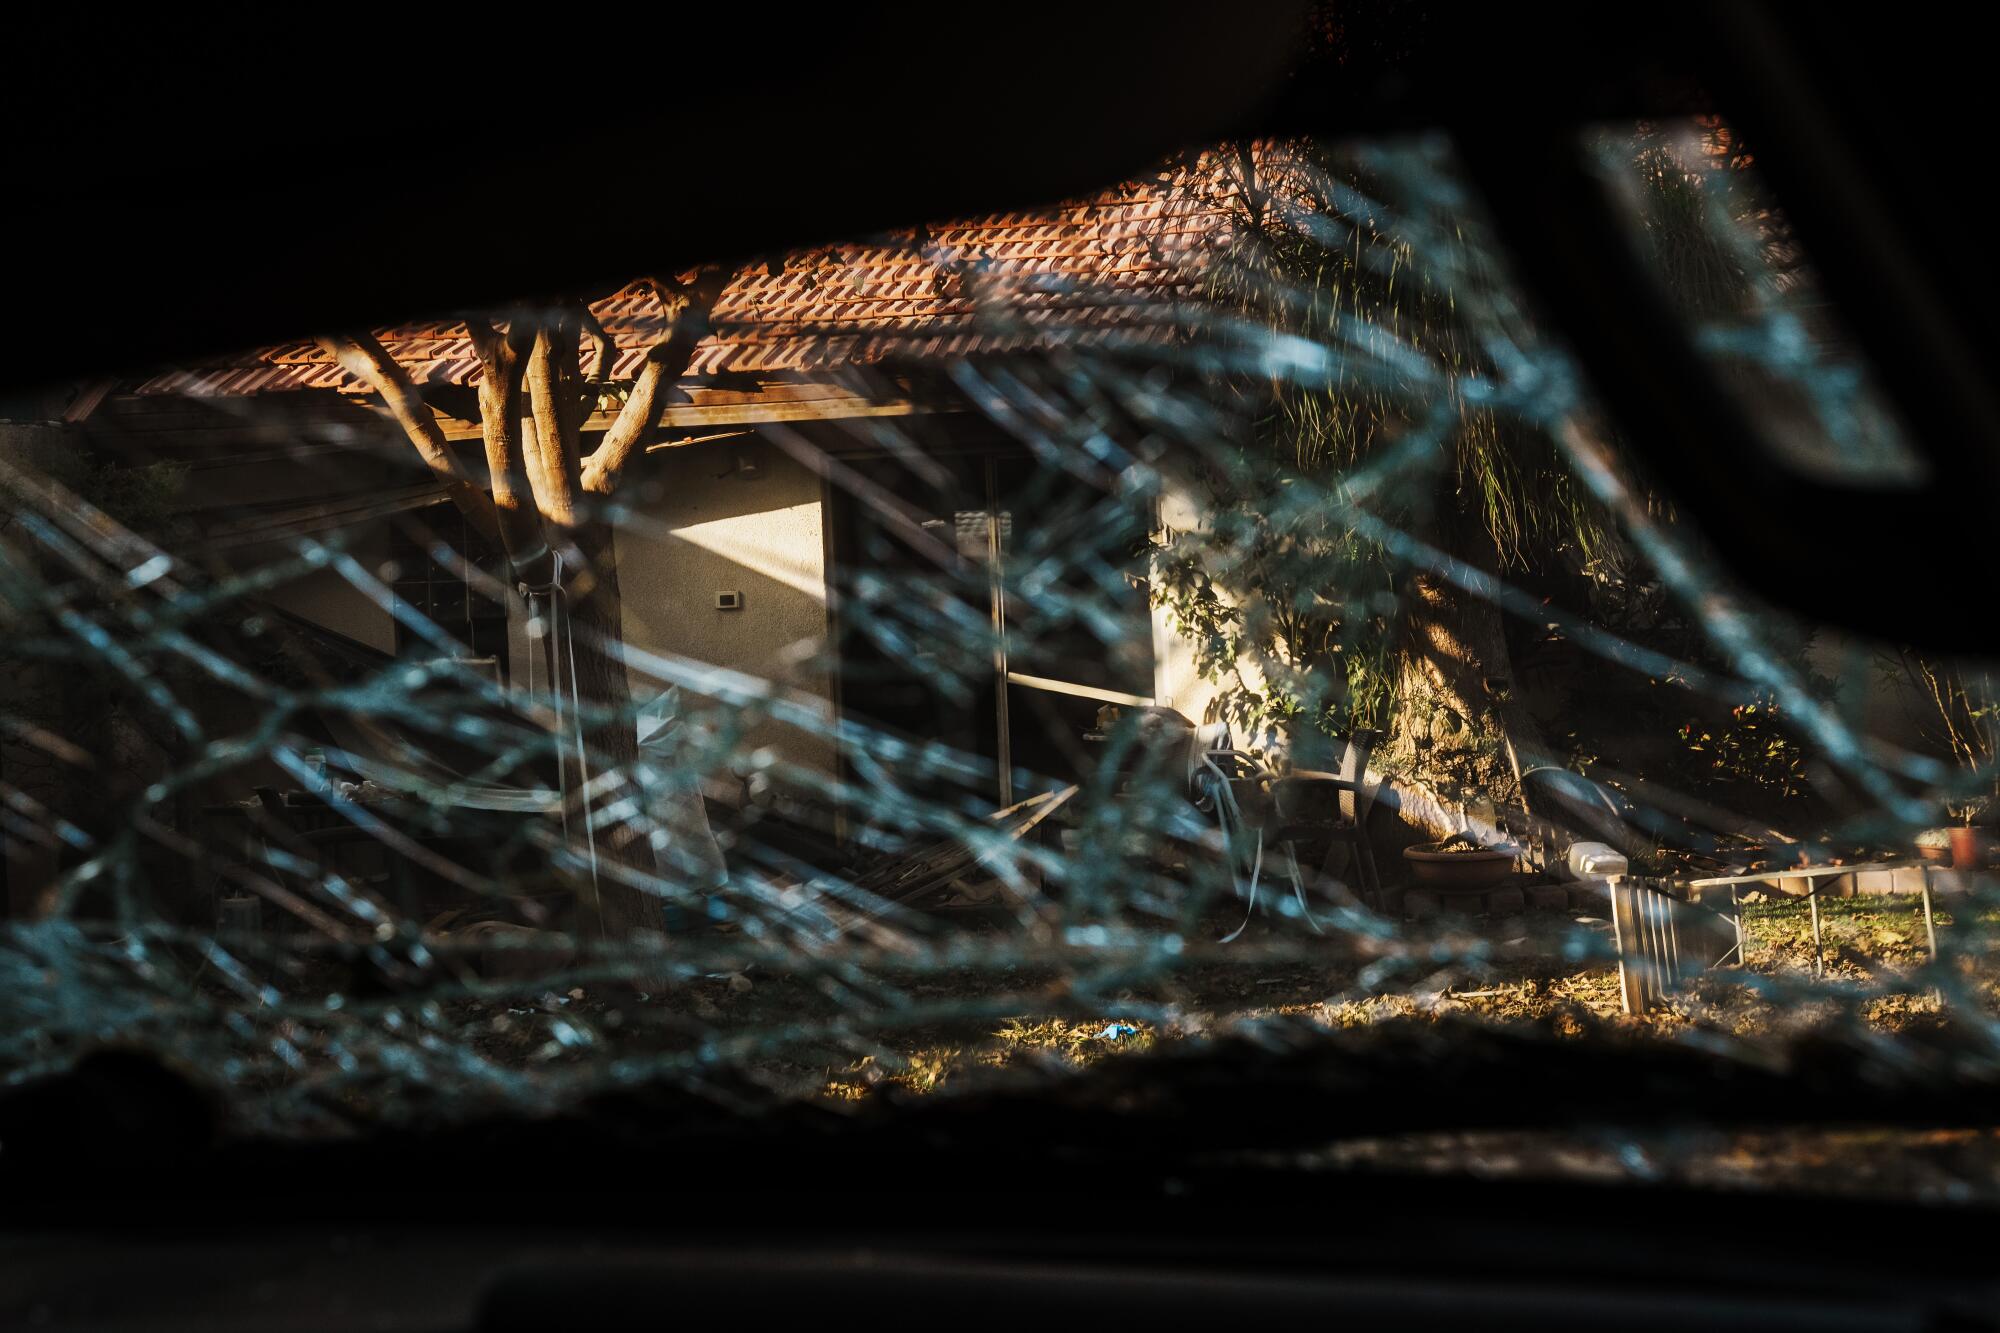 A view of a building seen through shattered glass